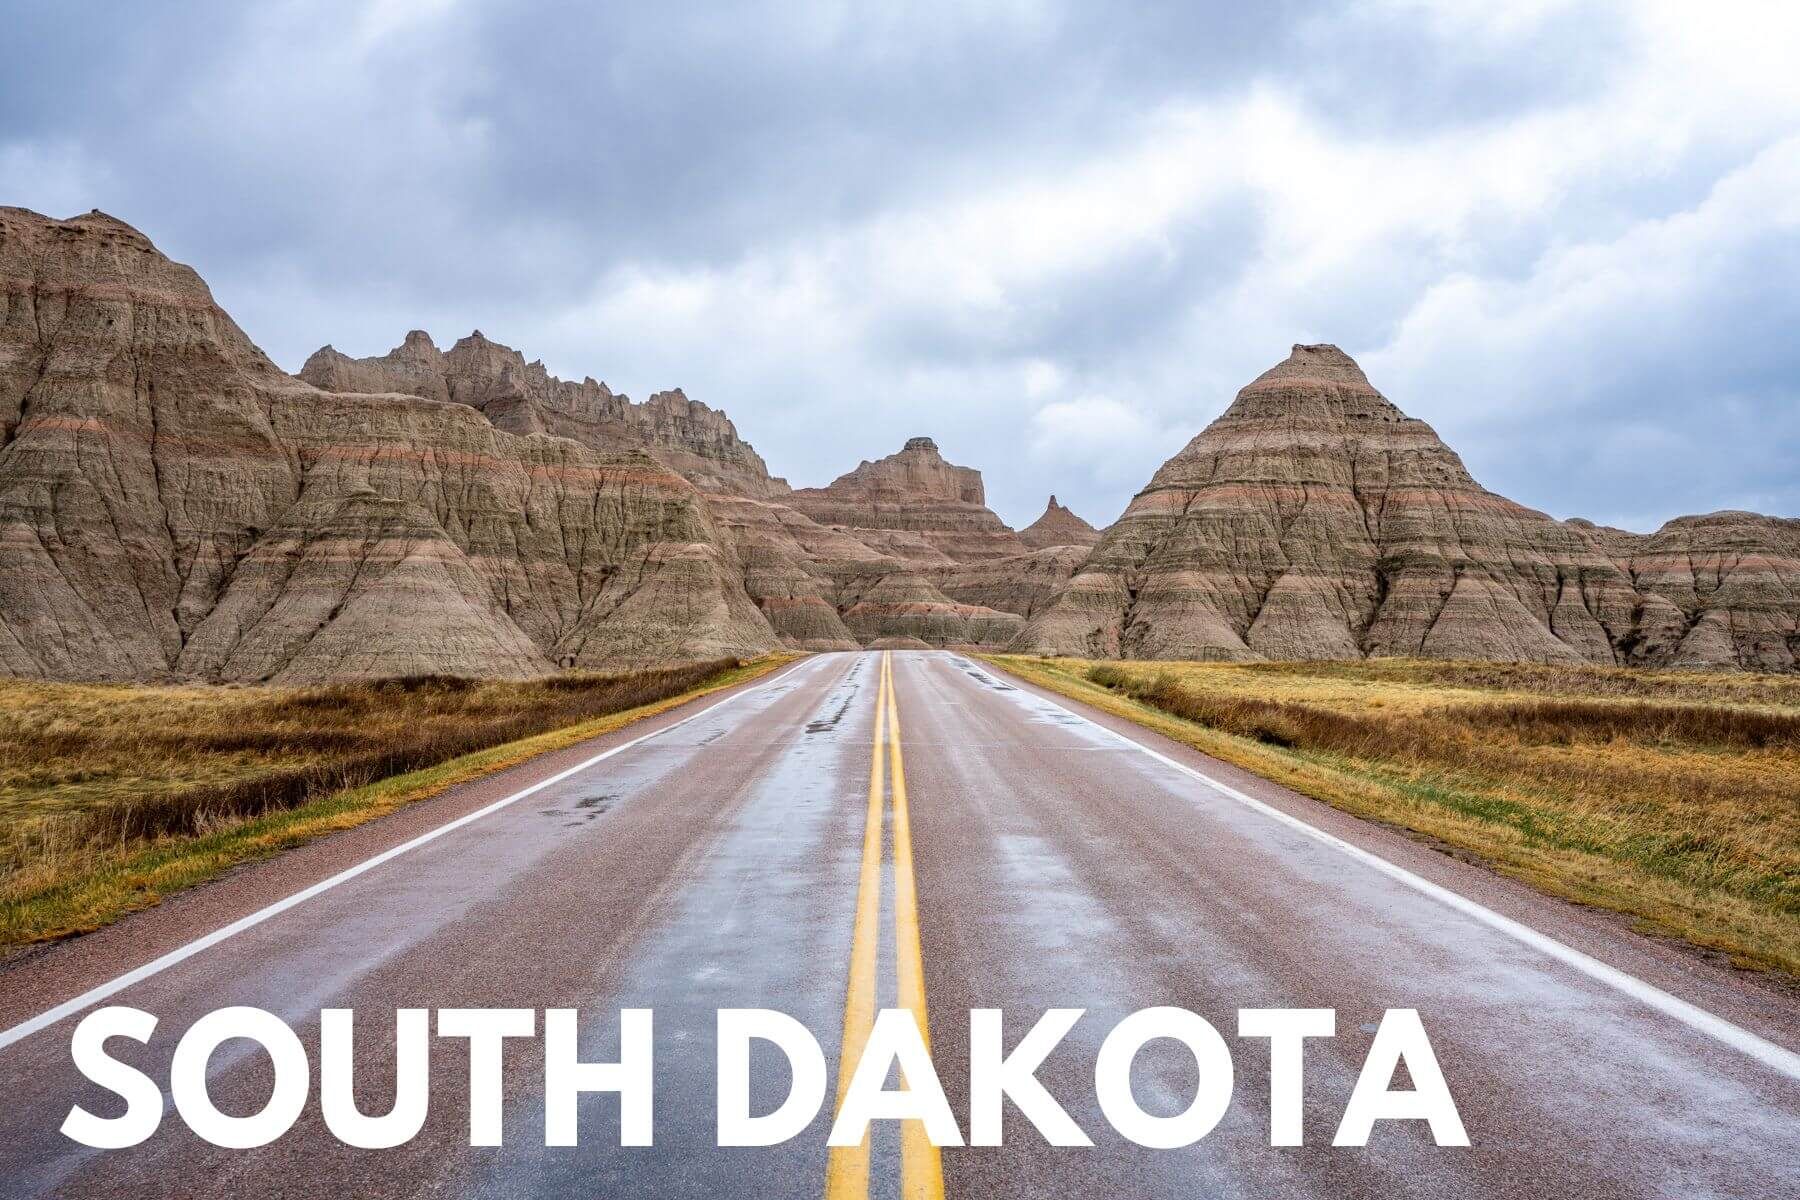 Photo of a road leading into colorful dome shaped formations in the Badlands with the words South Dakota overlaid